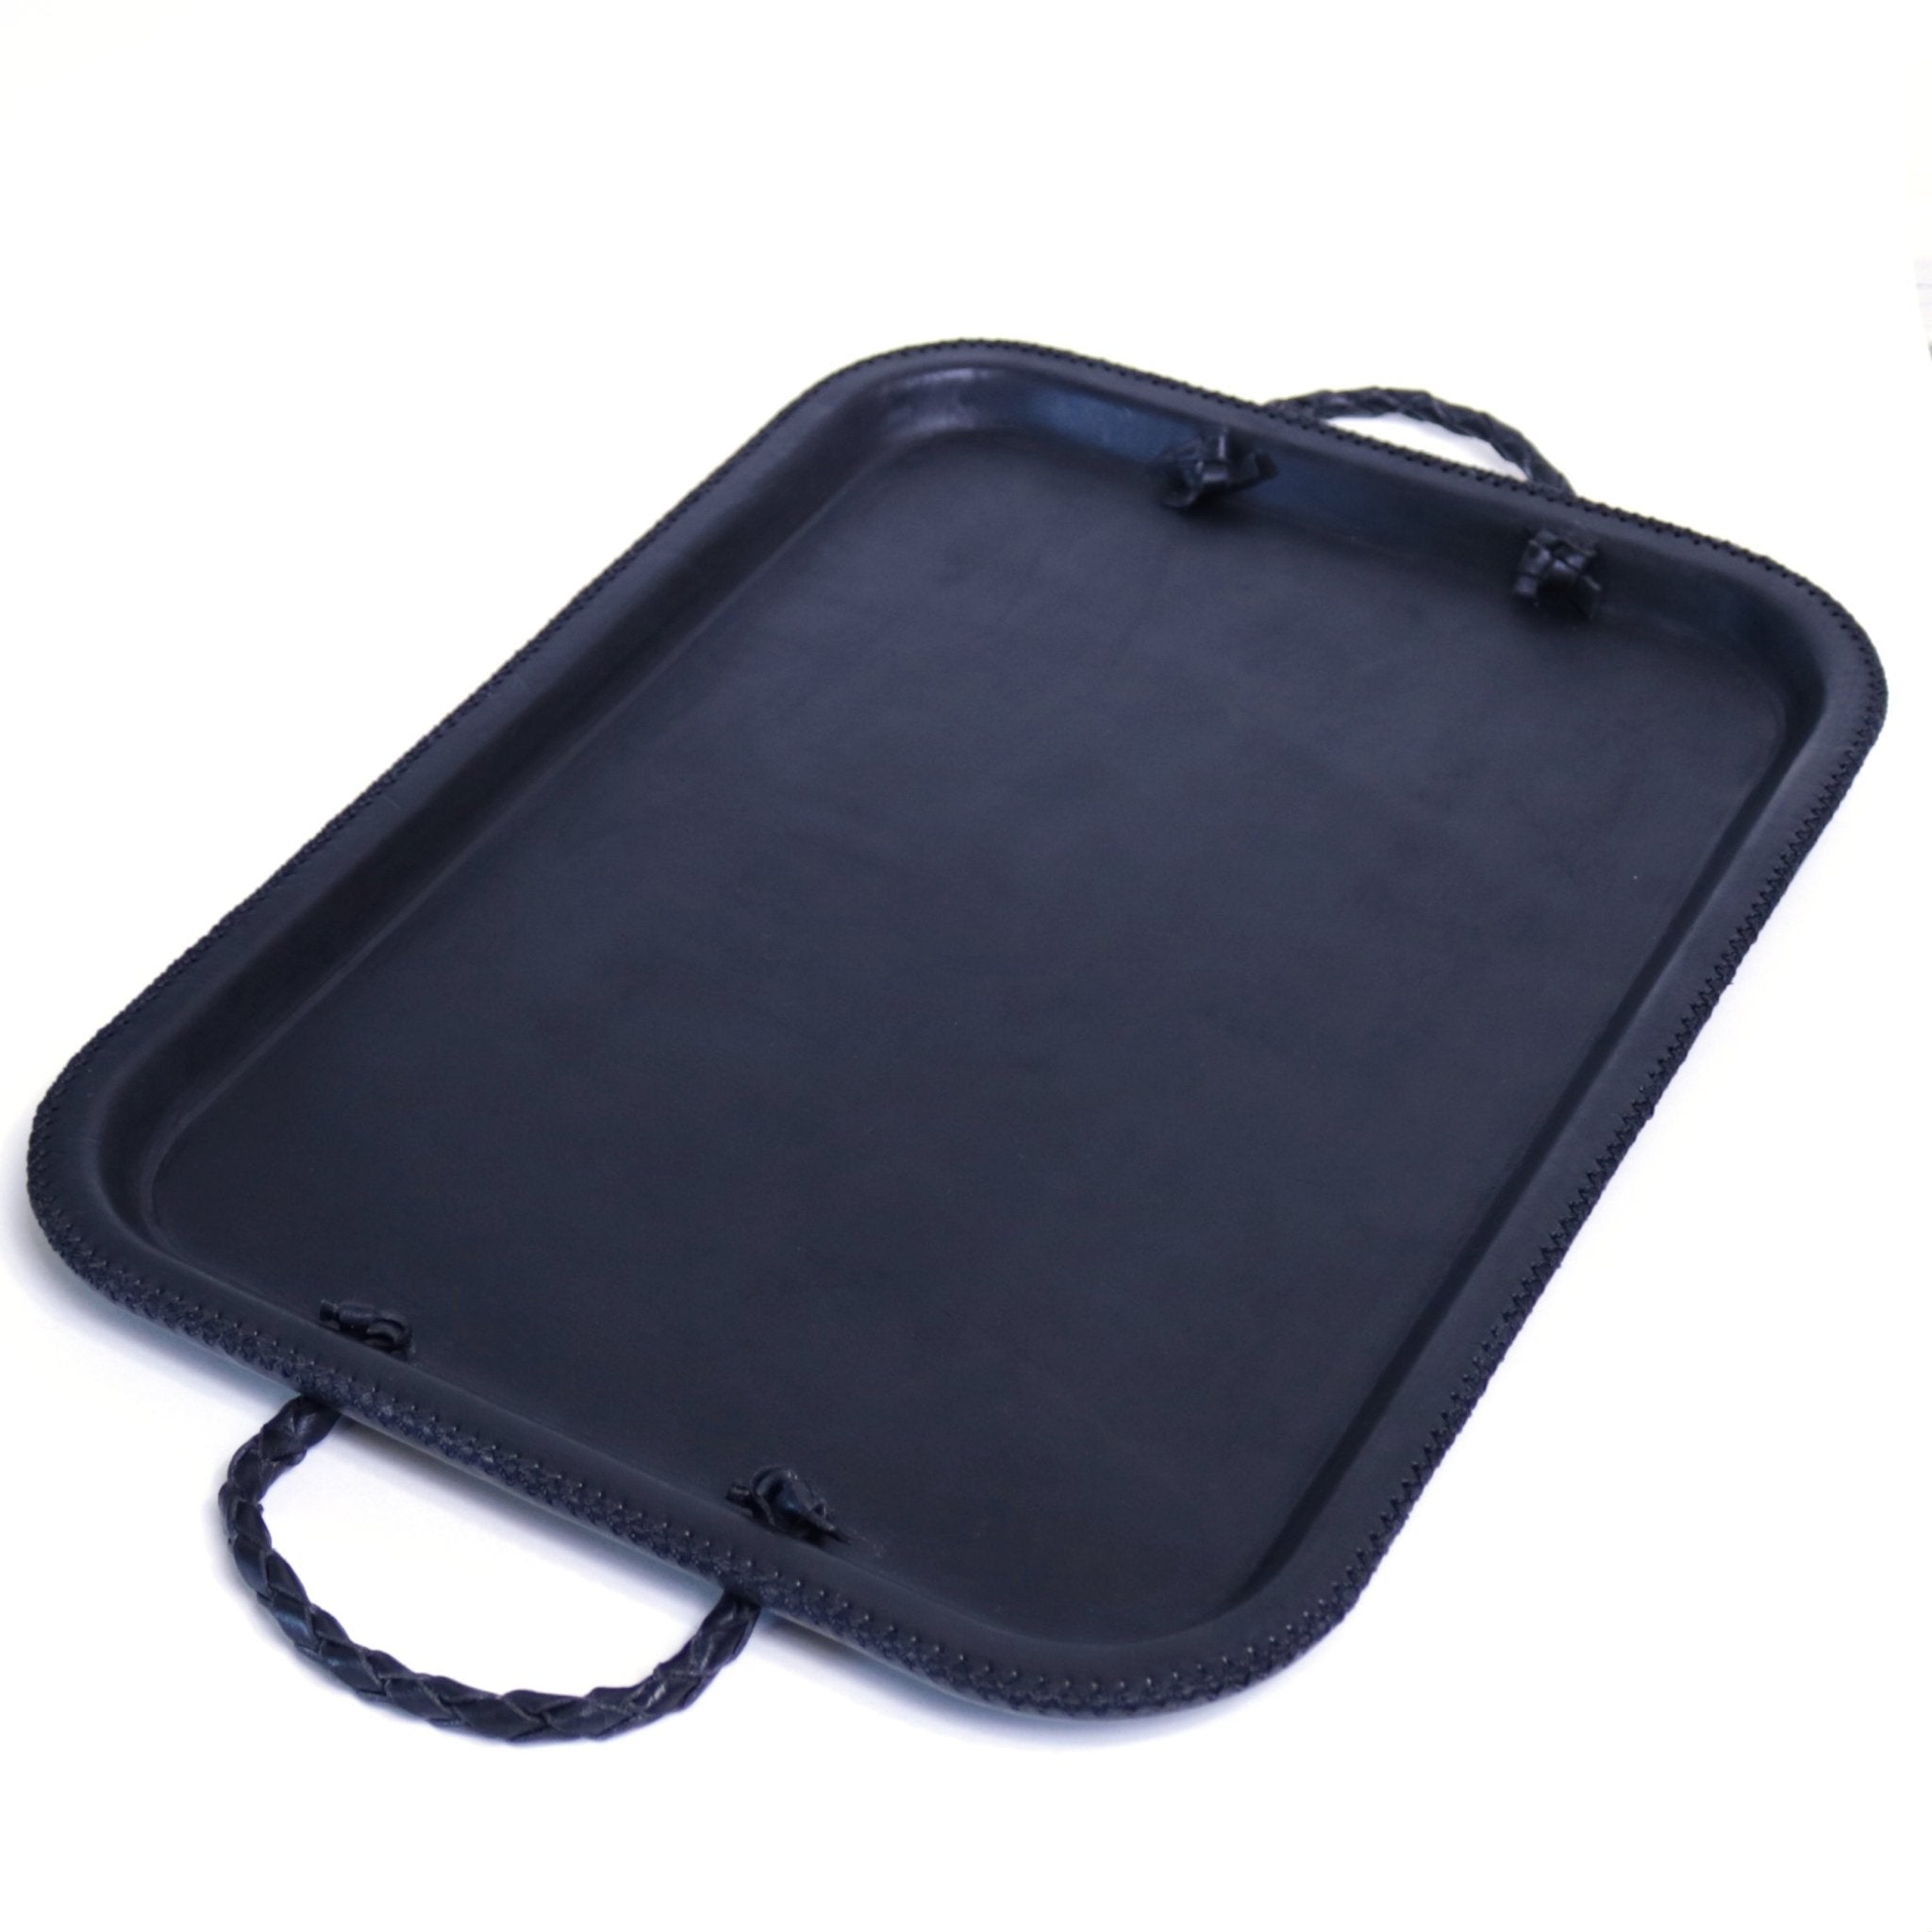 Hermana | Leather Serving Tray with Braided Handlescategory_Kitchen & Dining from Bati - SHOPELEOS